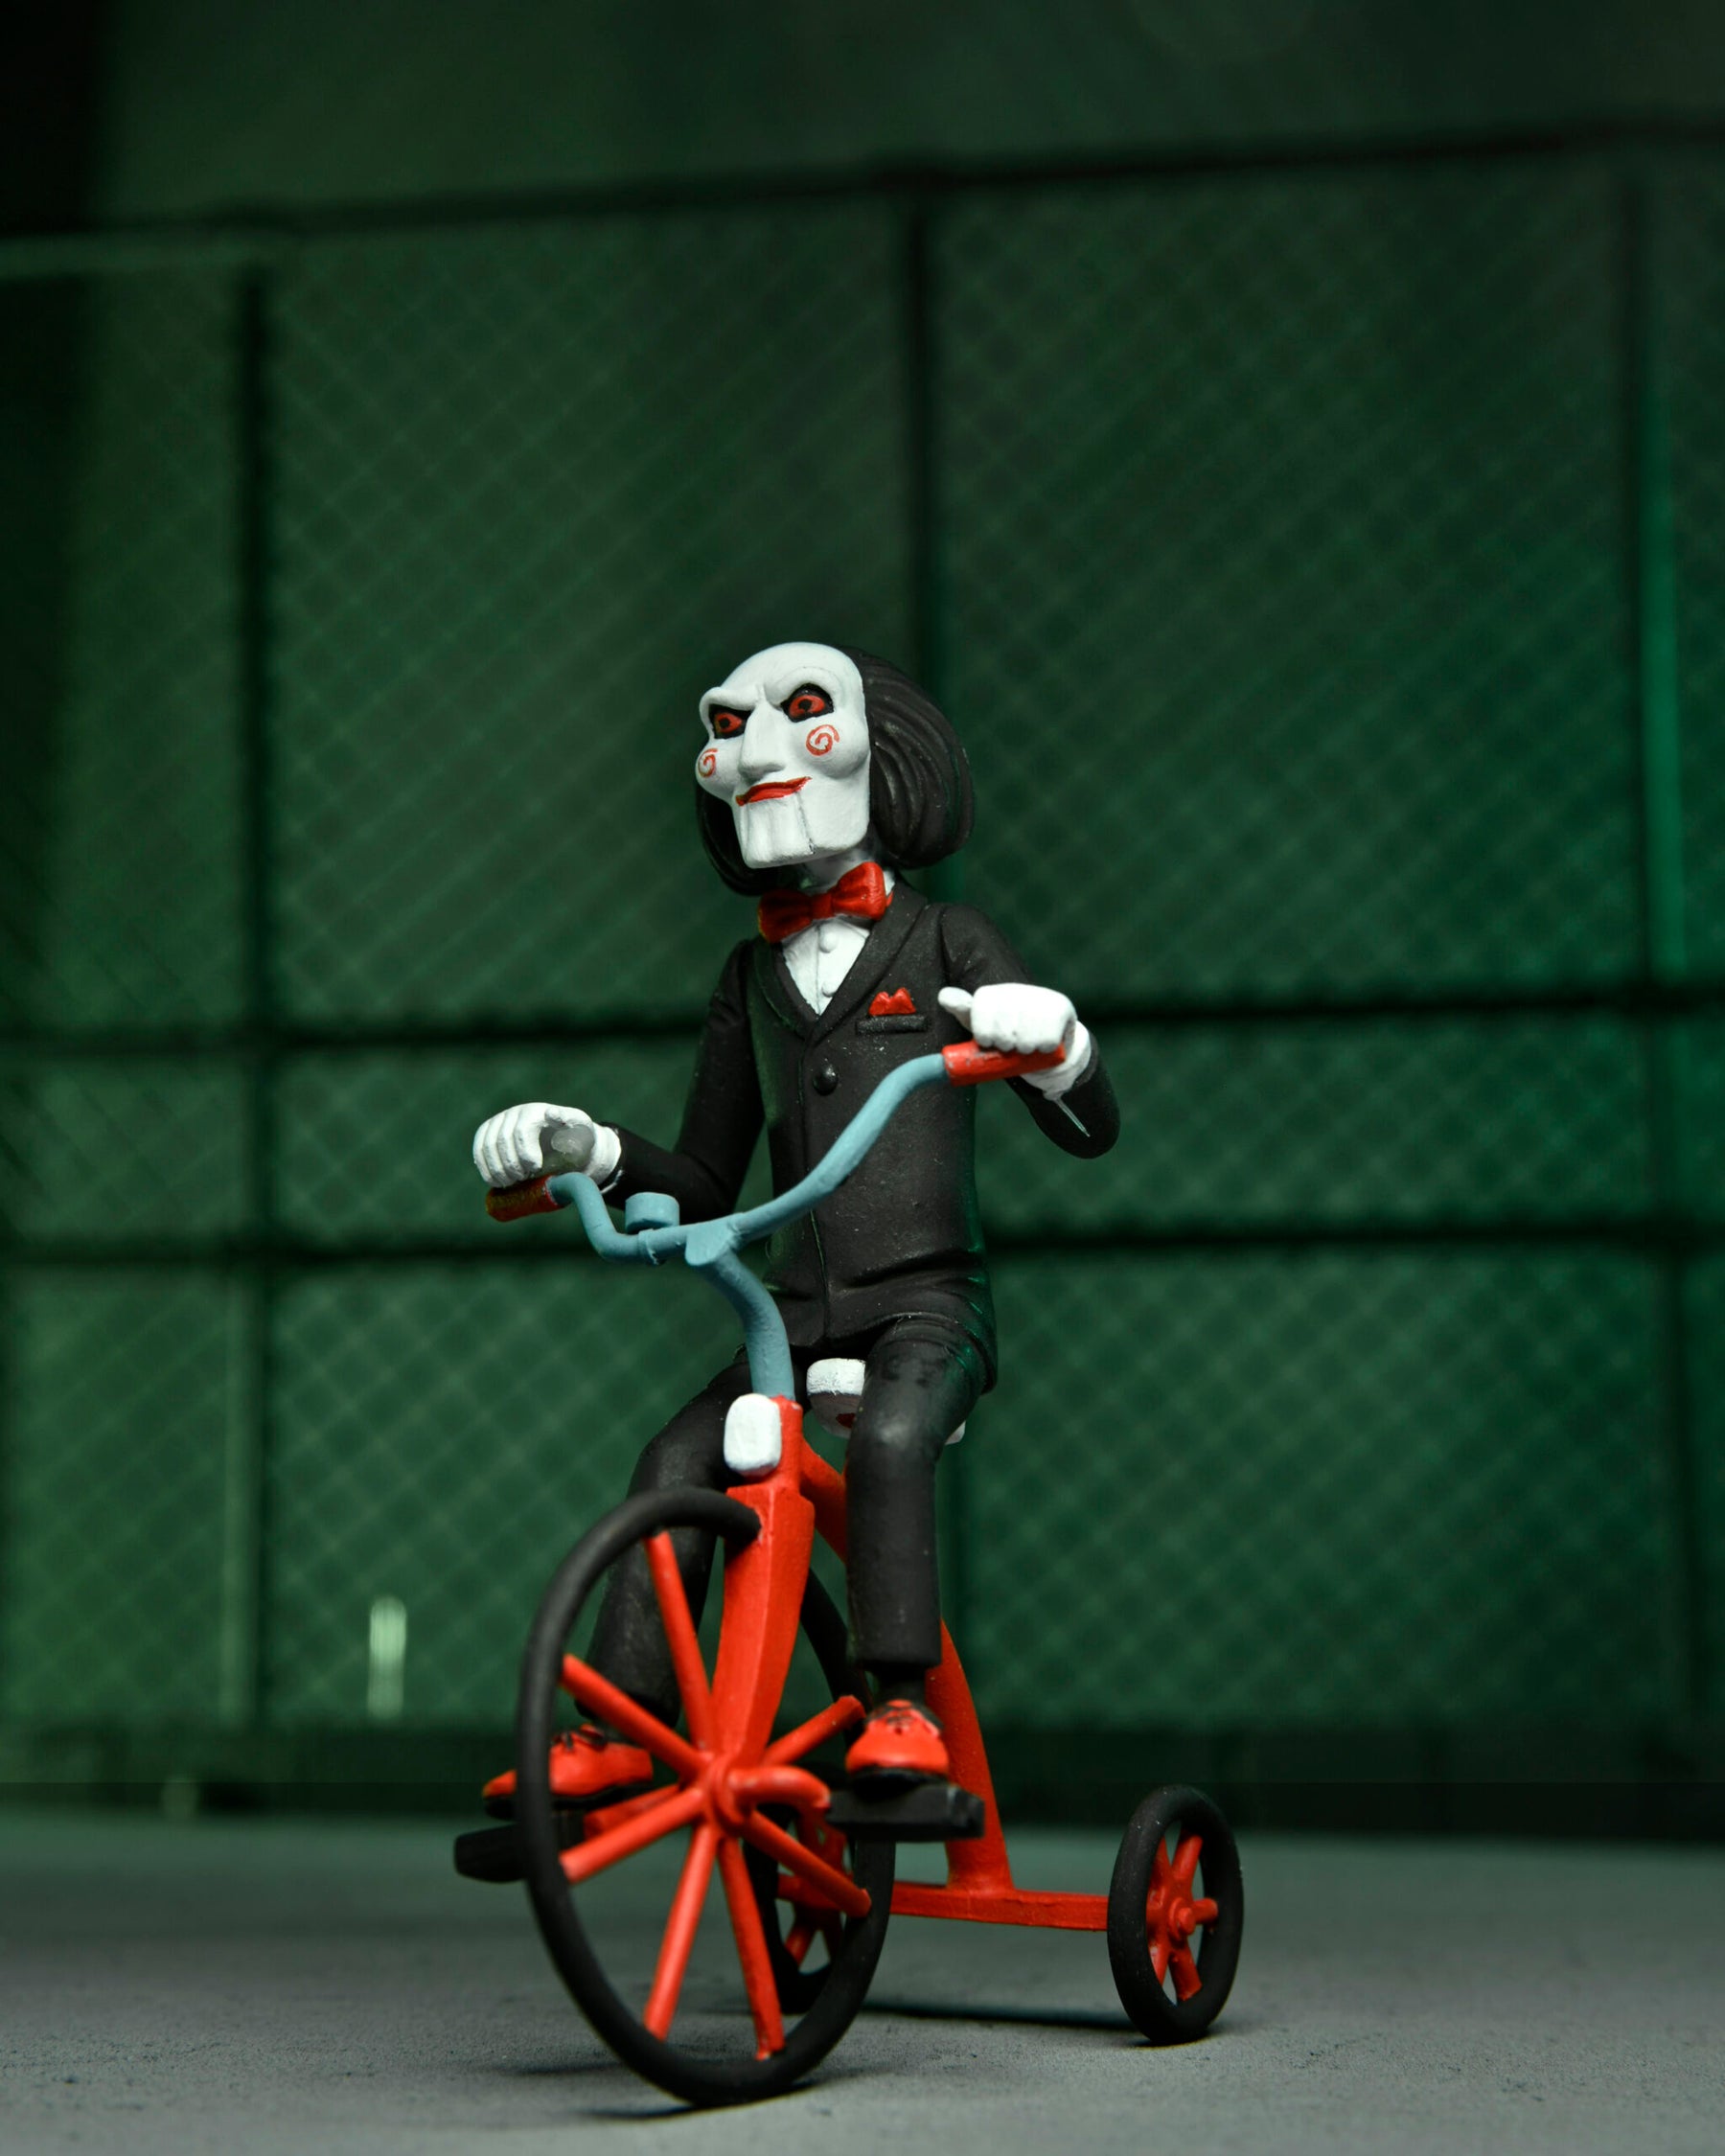 NECA - Toony Terrors Jigsaw Killer & Billy Tricycle Boxed Set (Saw) 6" Action Figure (Pre-Order Ships September)